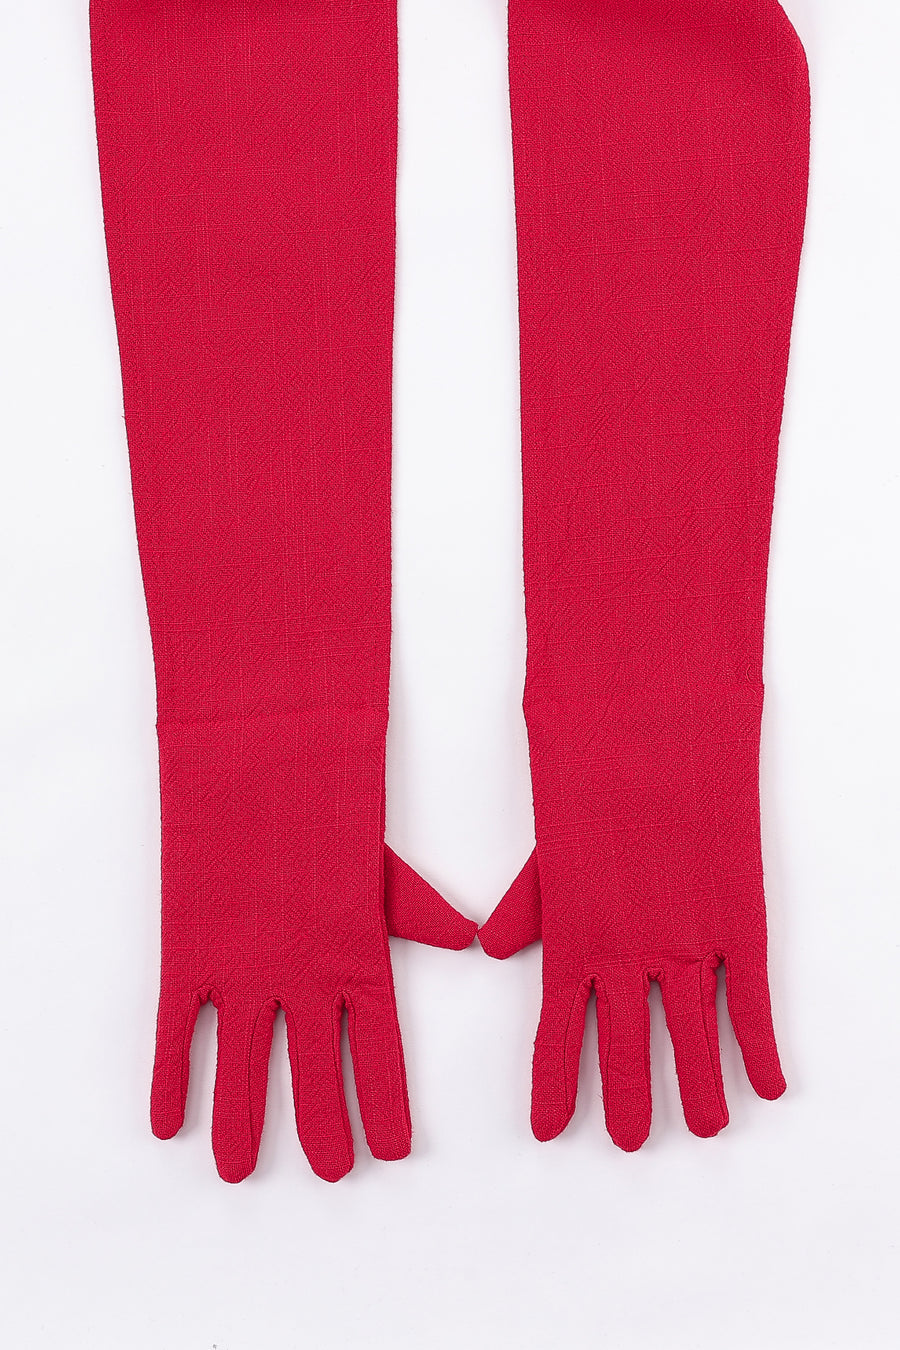 Red Helping Hands Sash